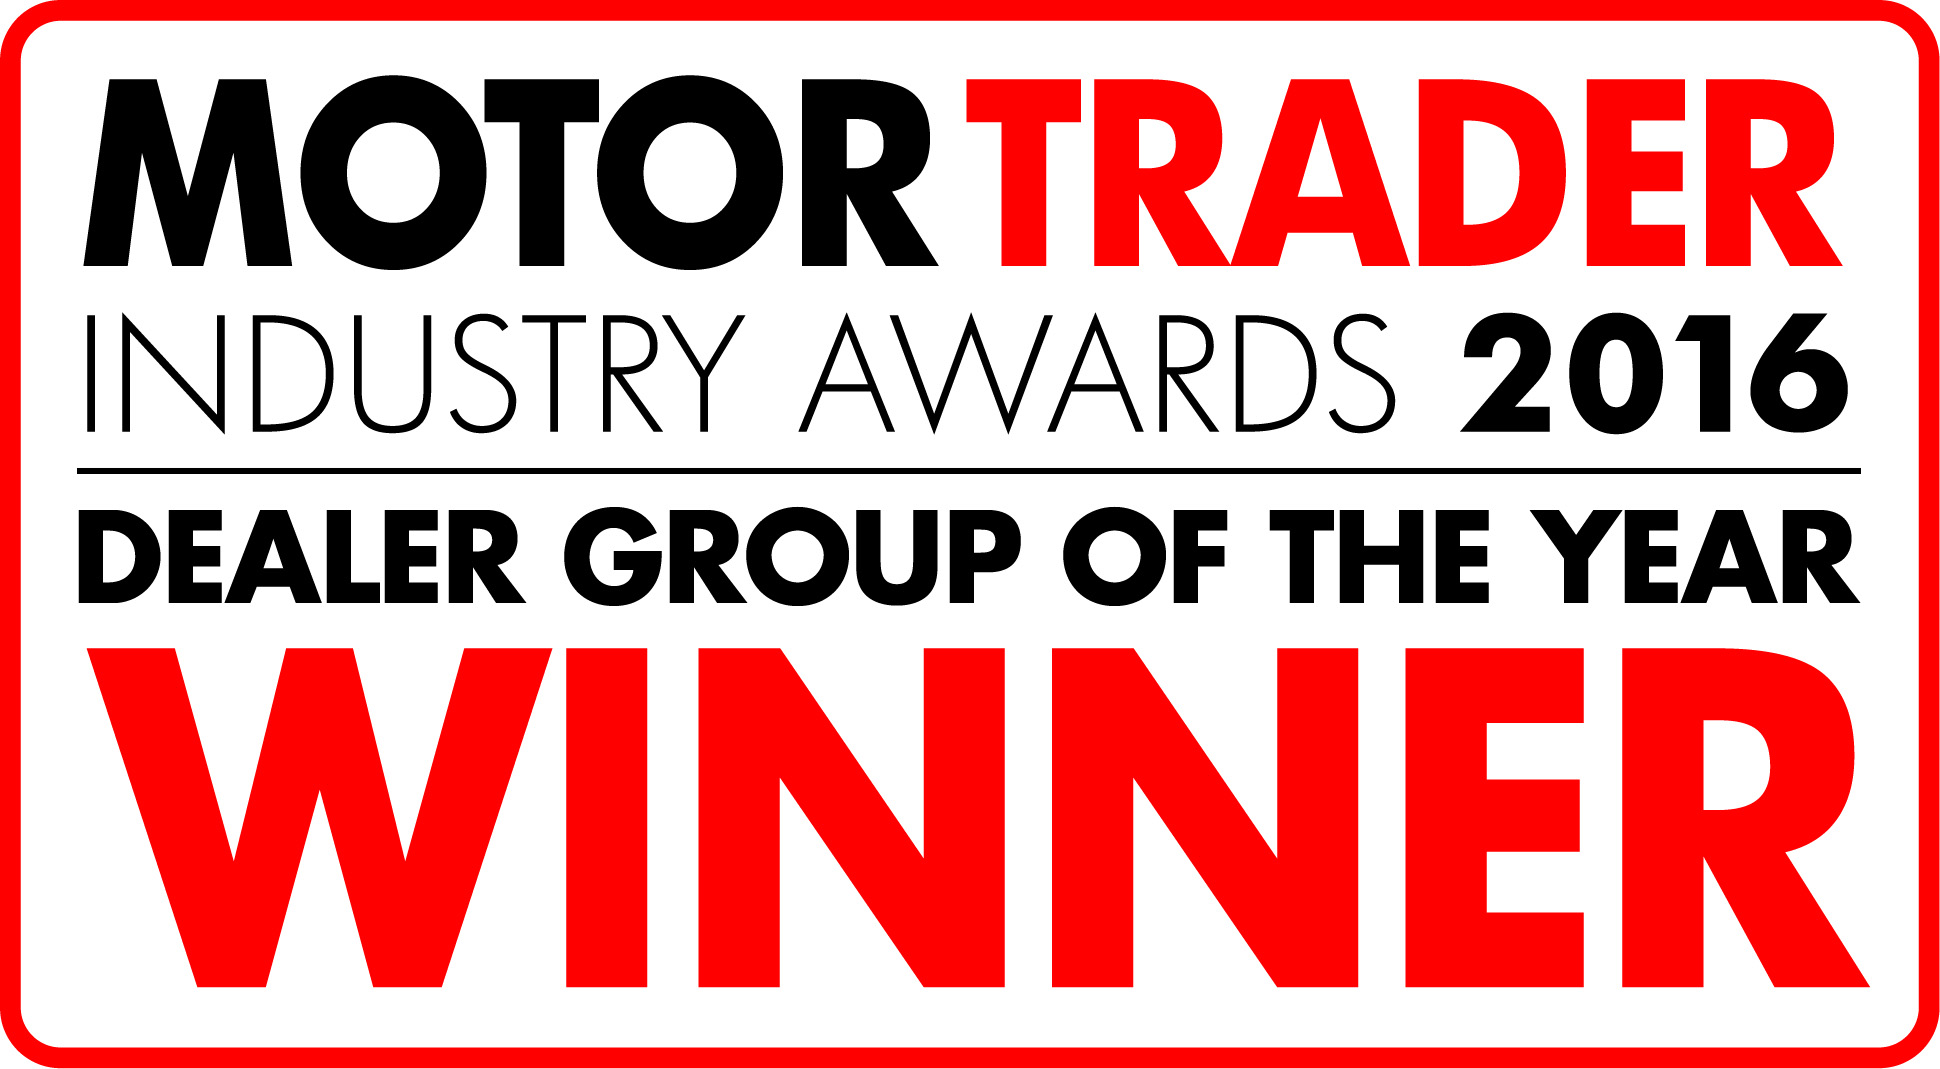 Dealer Group of the Year 2016